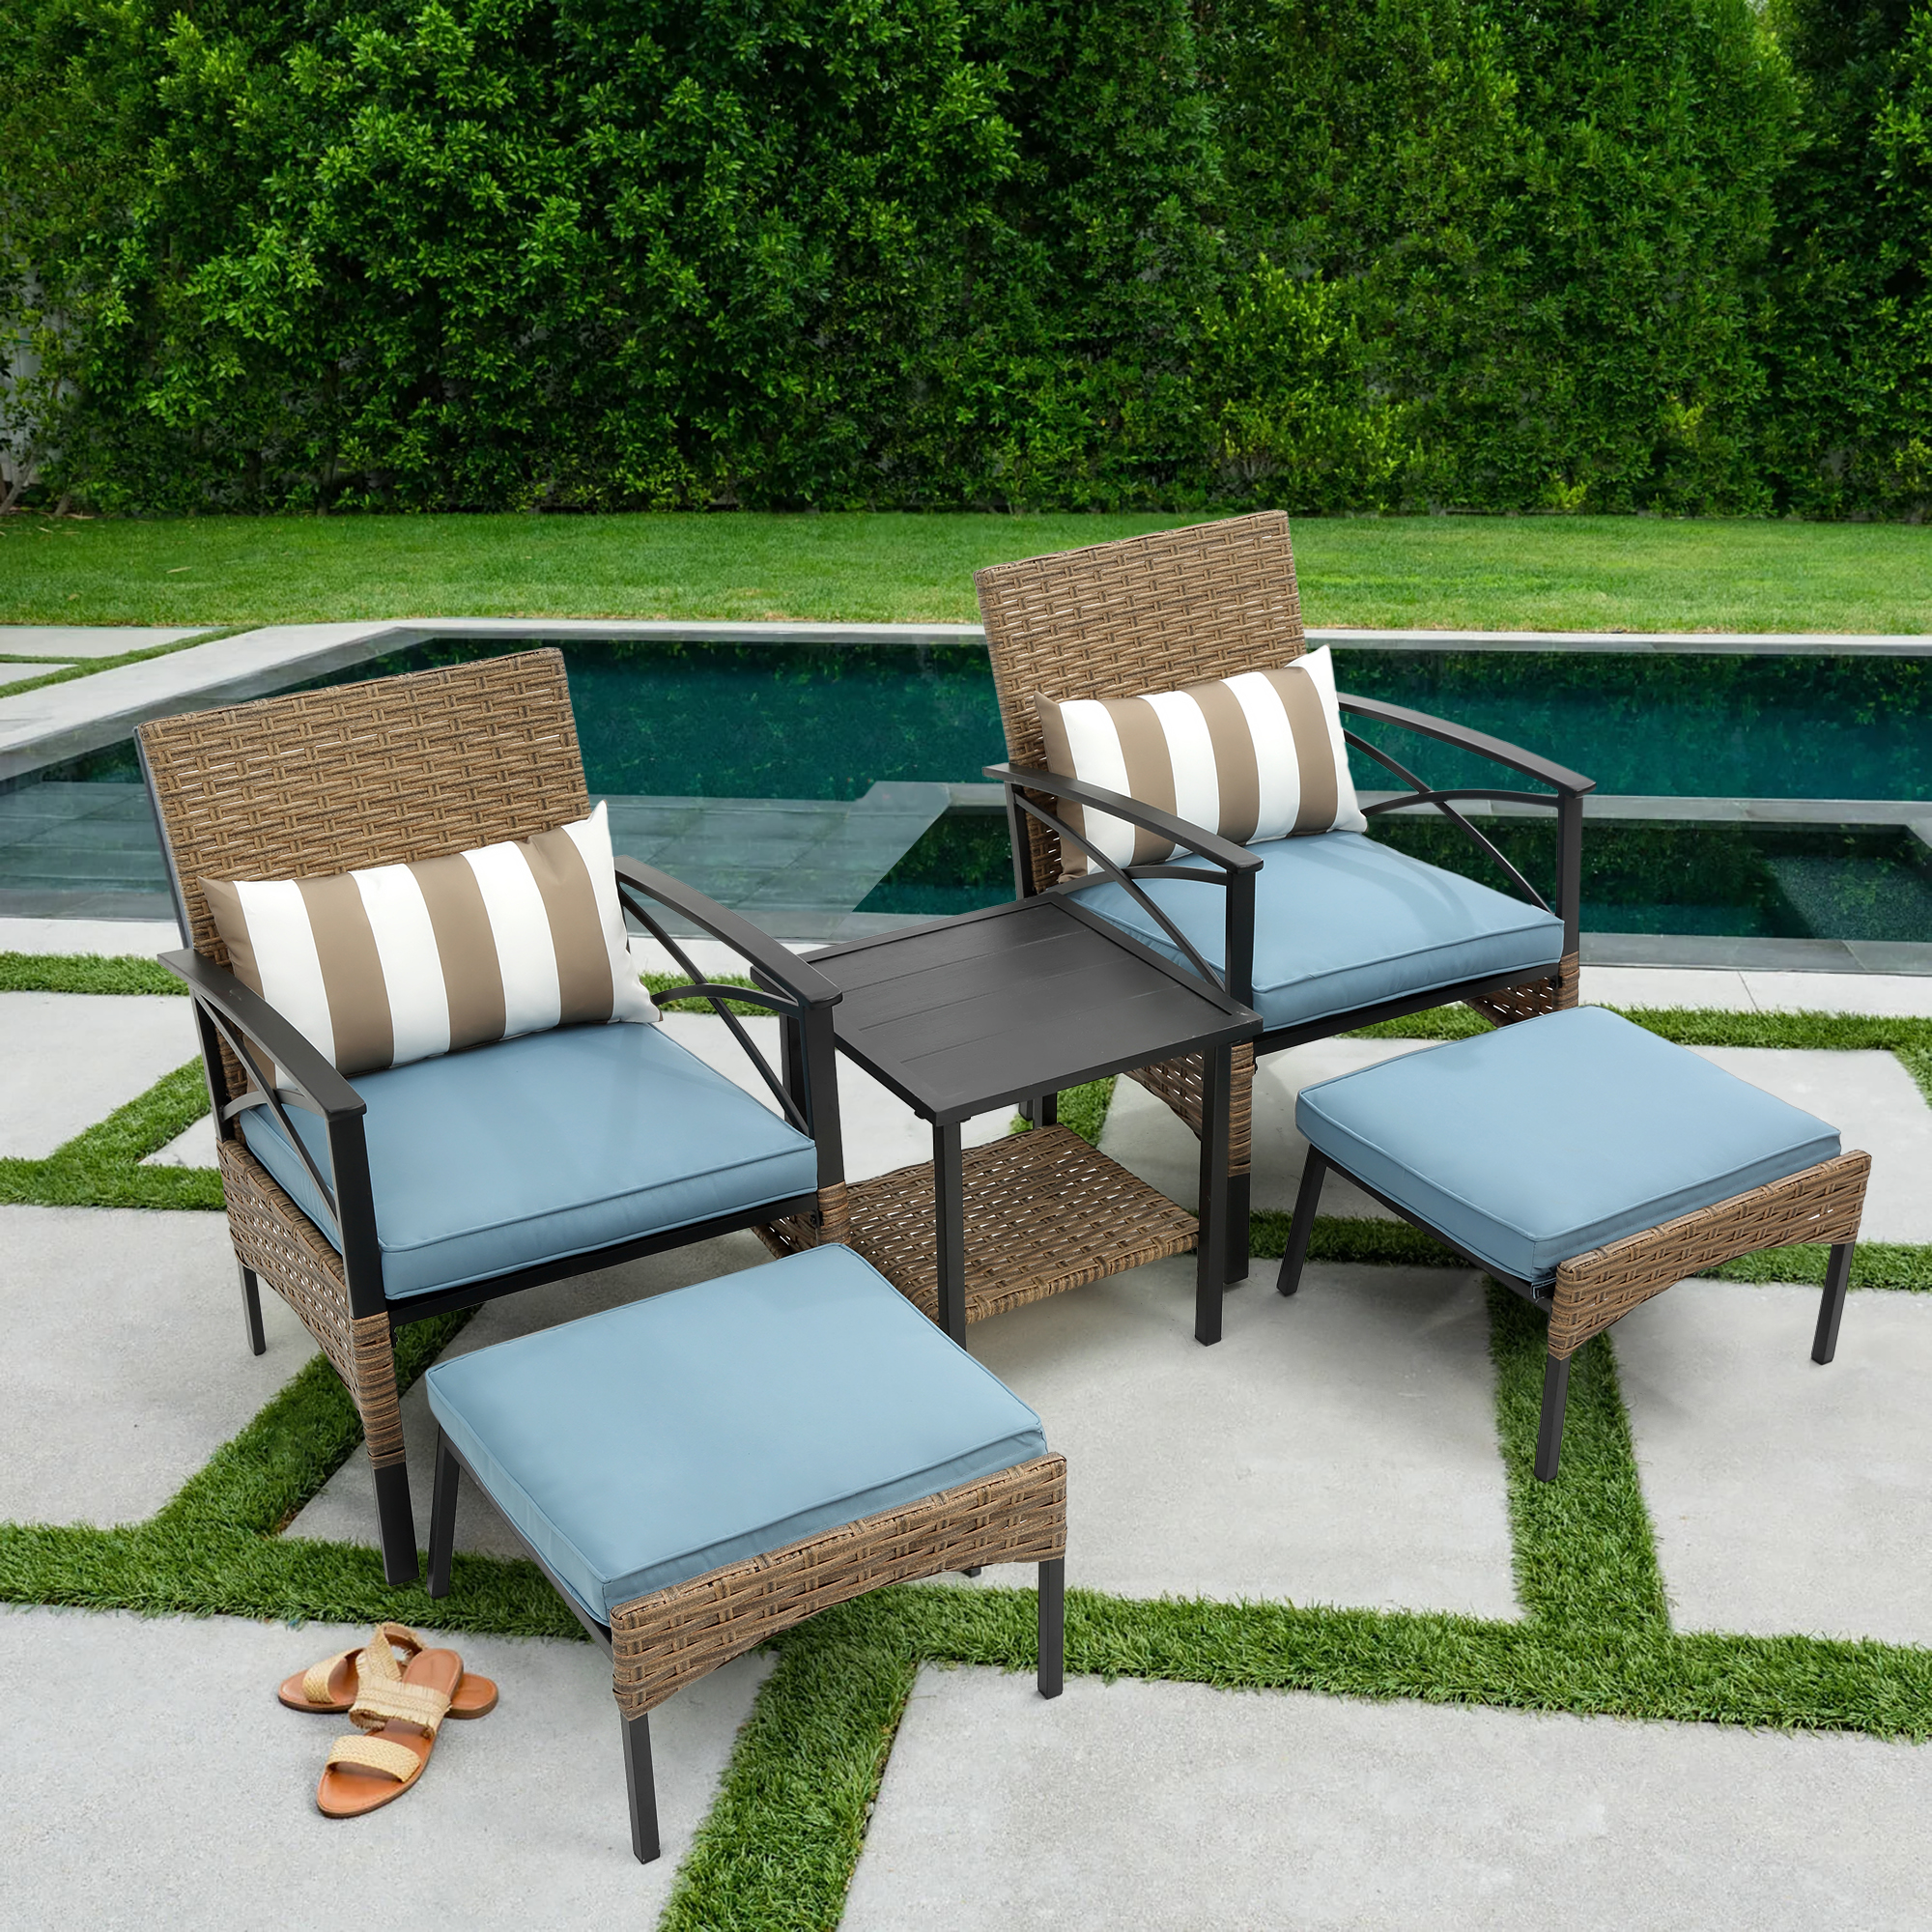 PE Brown Rattan Sofa Set of 5, Outdoor Patio Chair and Footstool Set with Cushions & Tea Table, All Weather Wicker Bistro Set, Poolside Conversation Furniture Set, Ideal for Garden Deck Coffee Bar - image 1 of 8